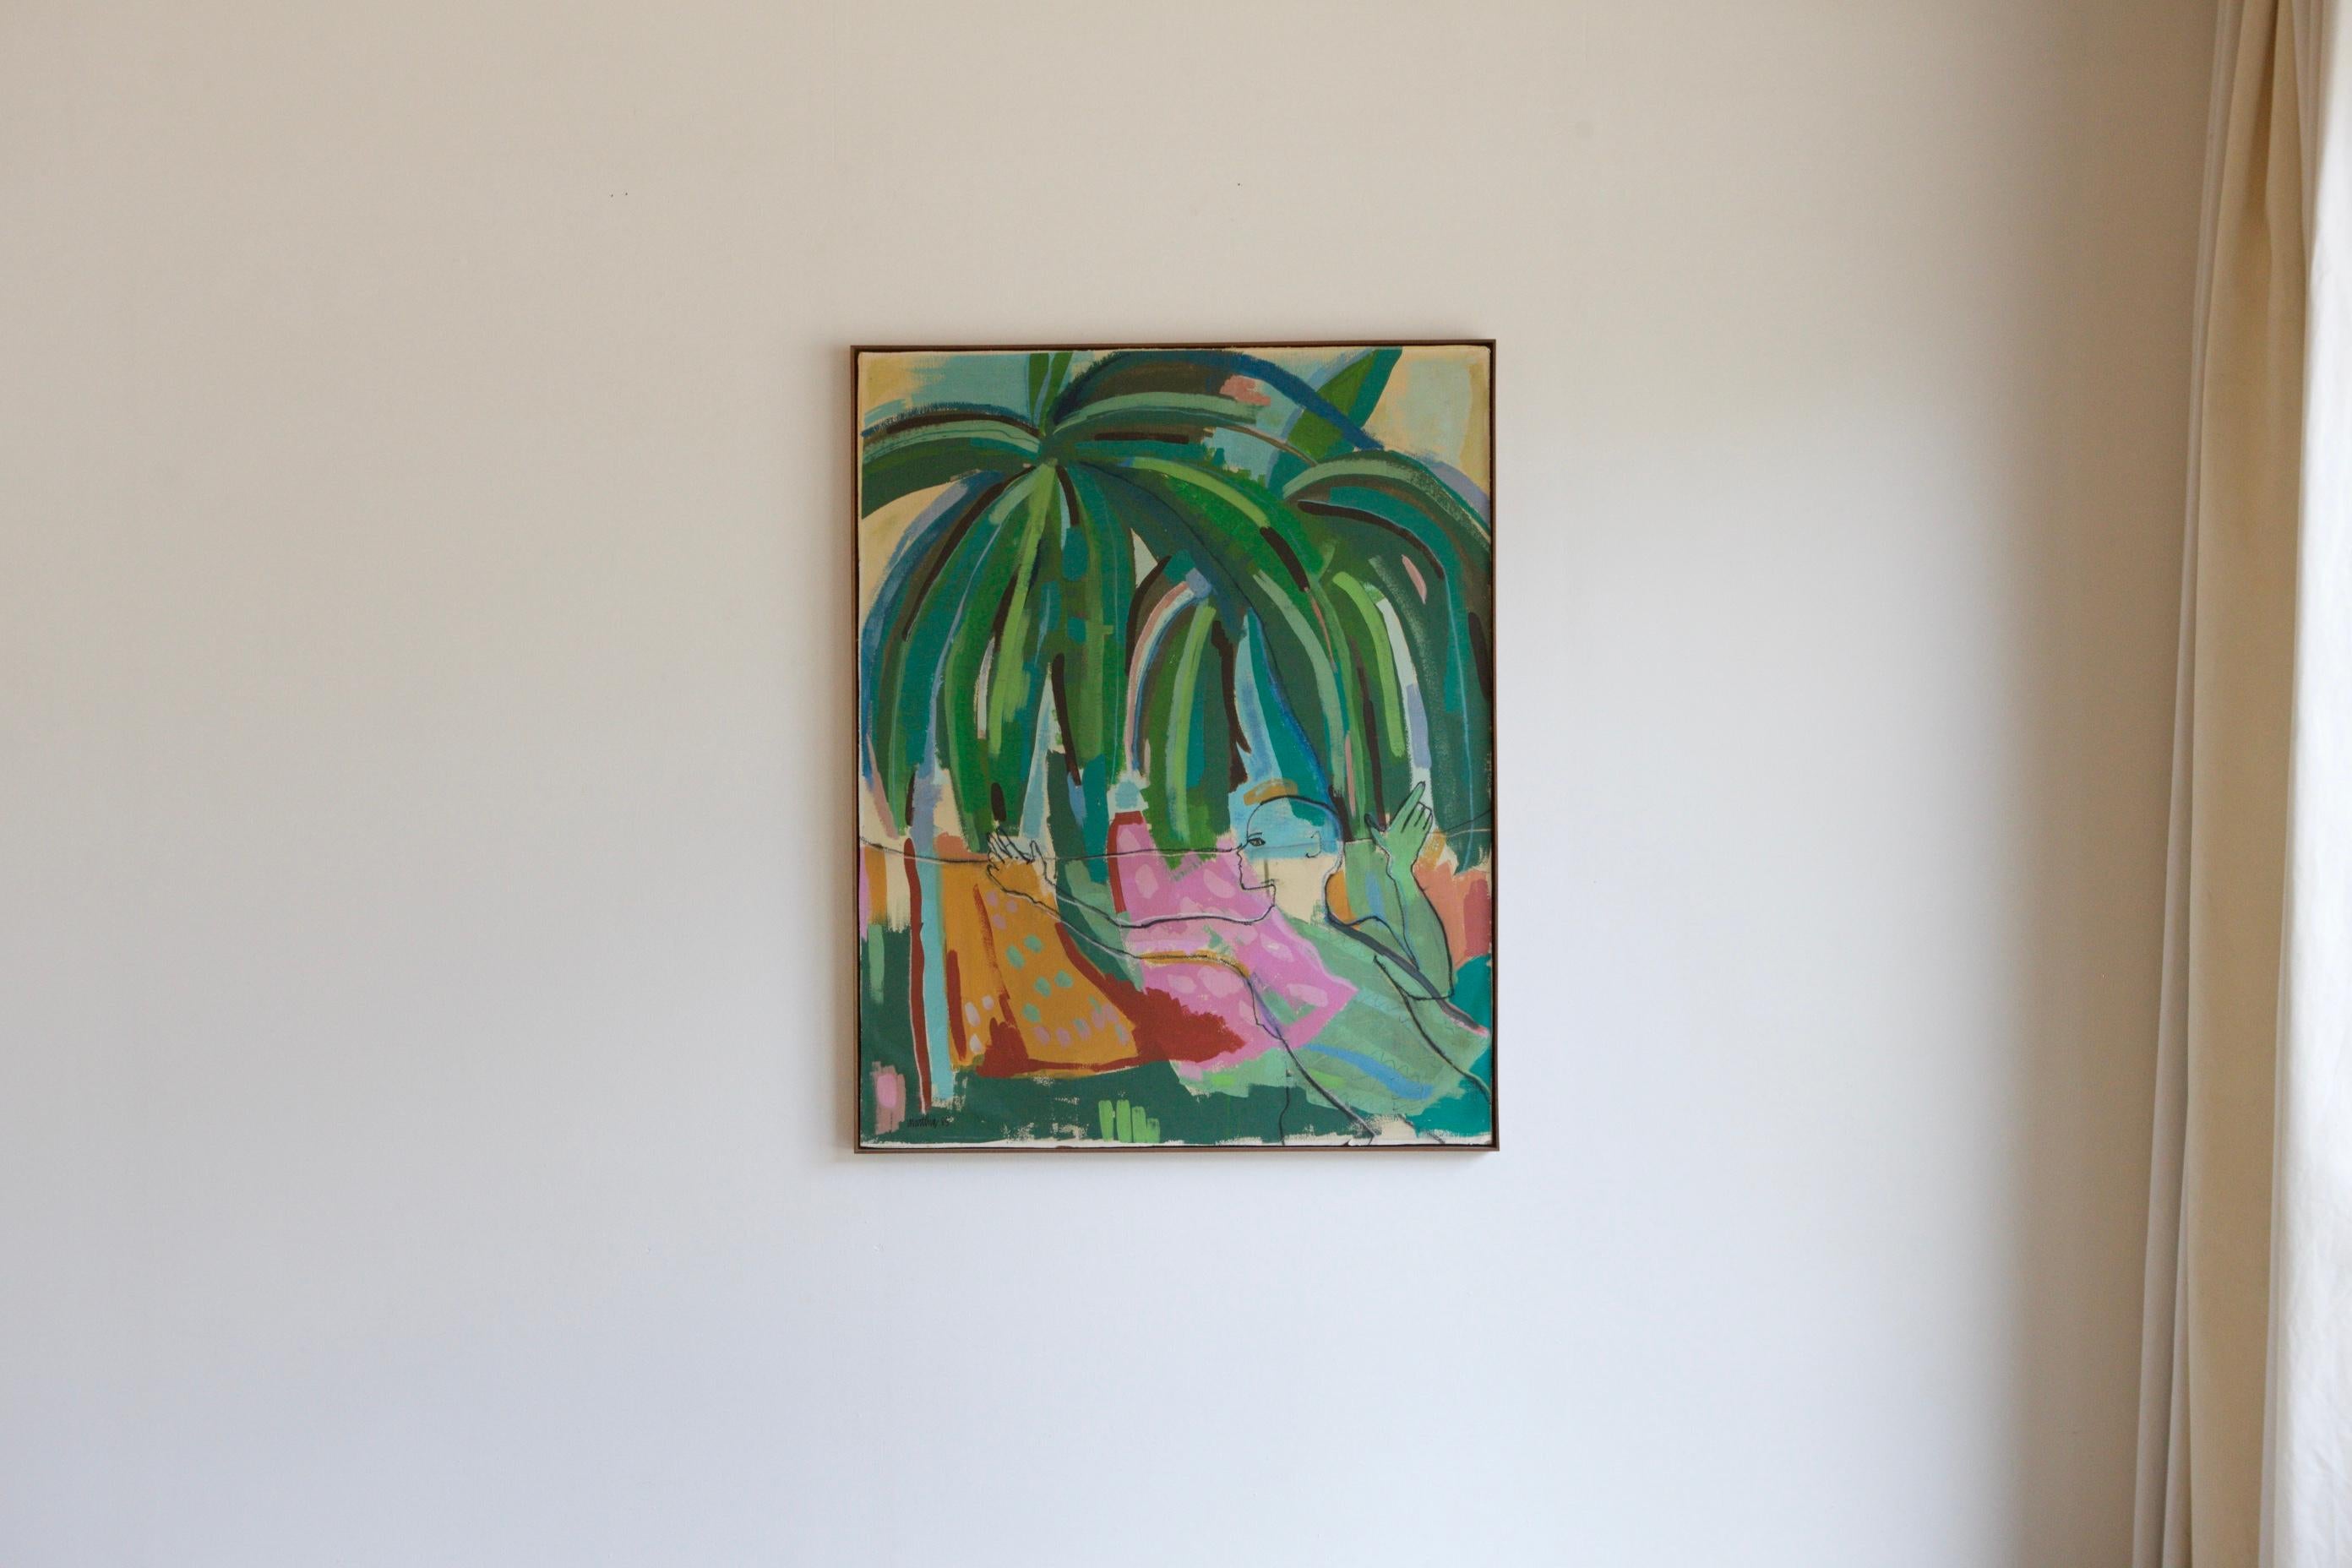 This large work is a beloved part of our personal collection that is now for sale. Arcylic on paper which has then been mounted on board. It has a tropical feel with vibrant colours and confident brush strokes depicting palms and the outline of a